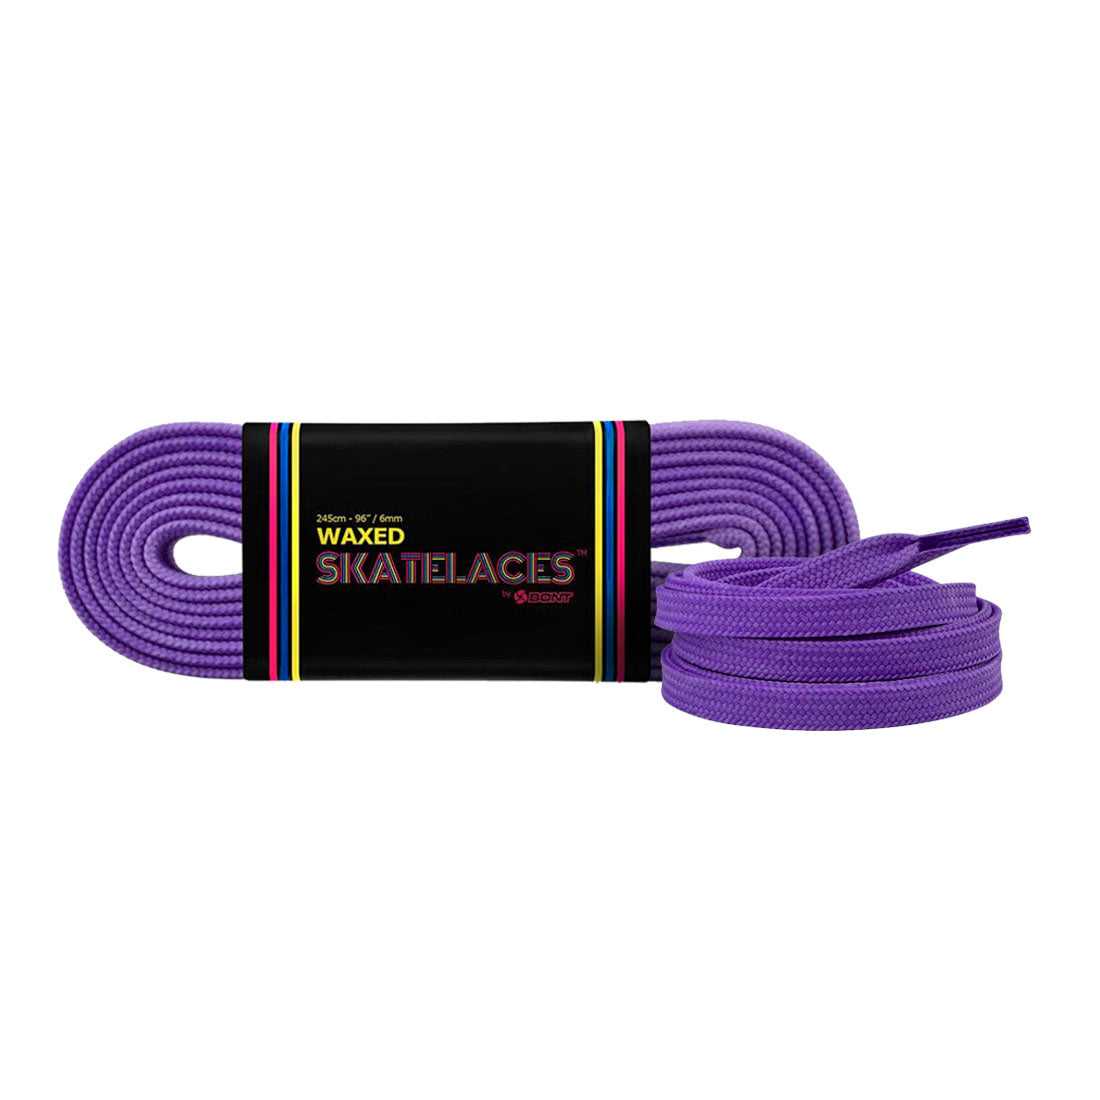 Bont Waxed 6mm Laces - 275cm/108in Dare You Purple Laces